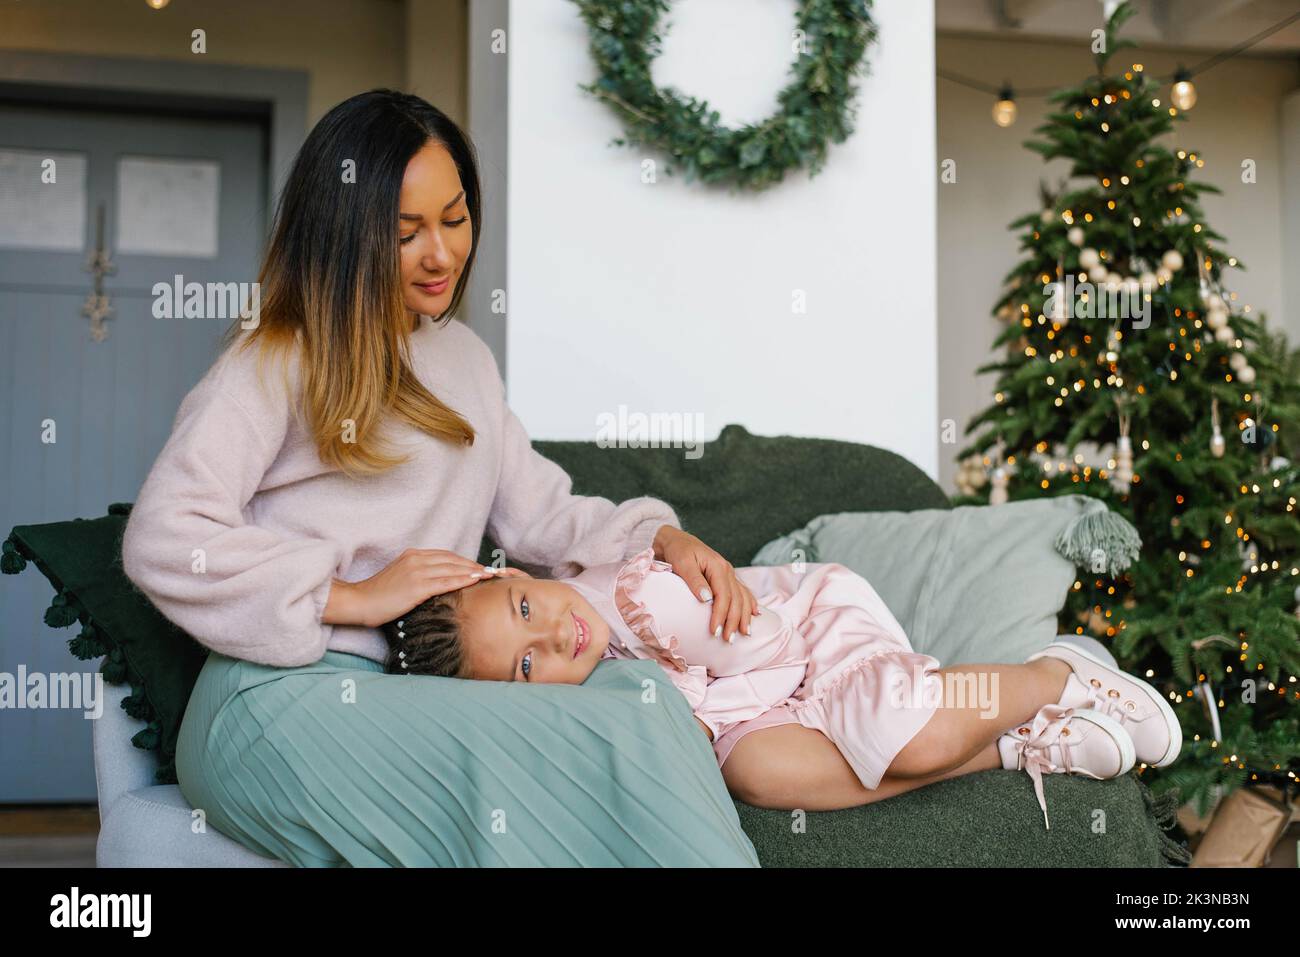 Daughter put head on mother's lap and is smiling at the Christmas tree Stock Photo